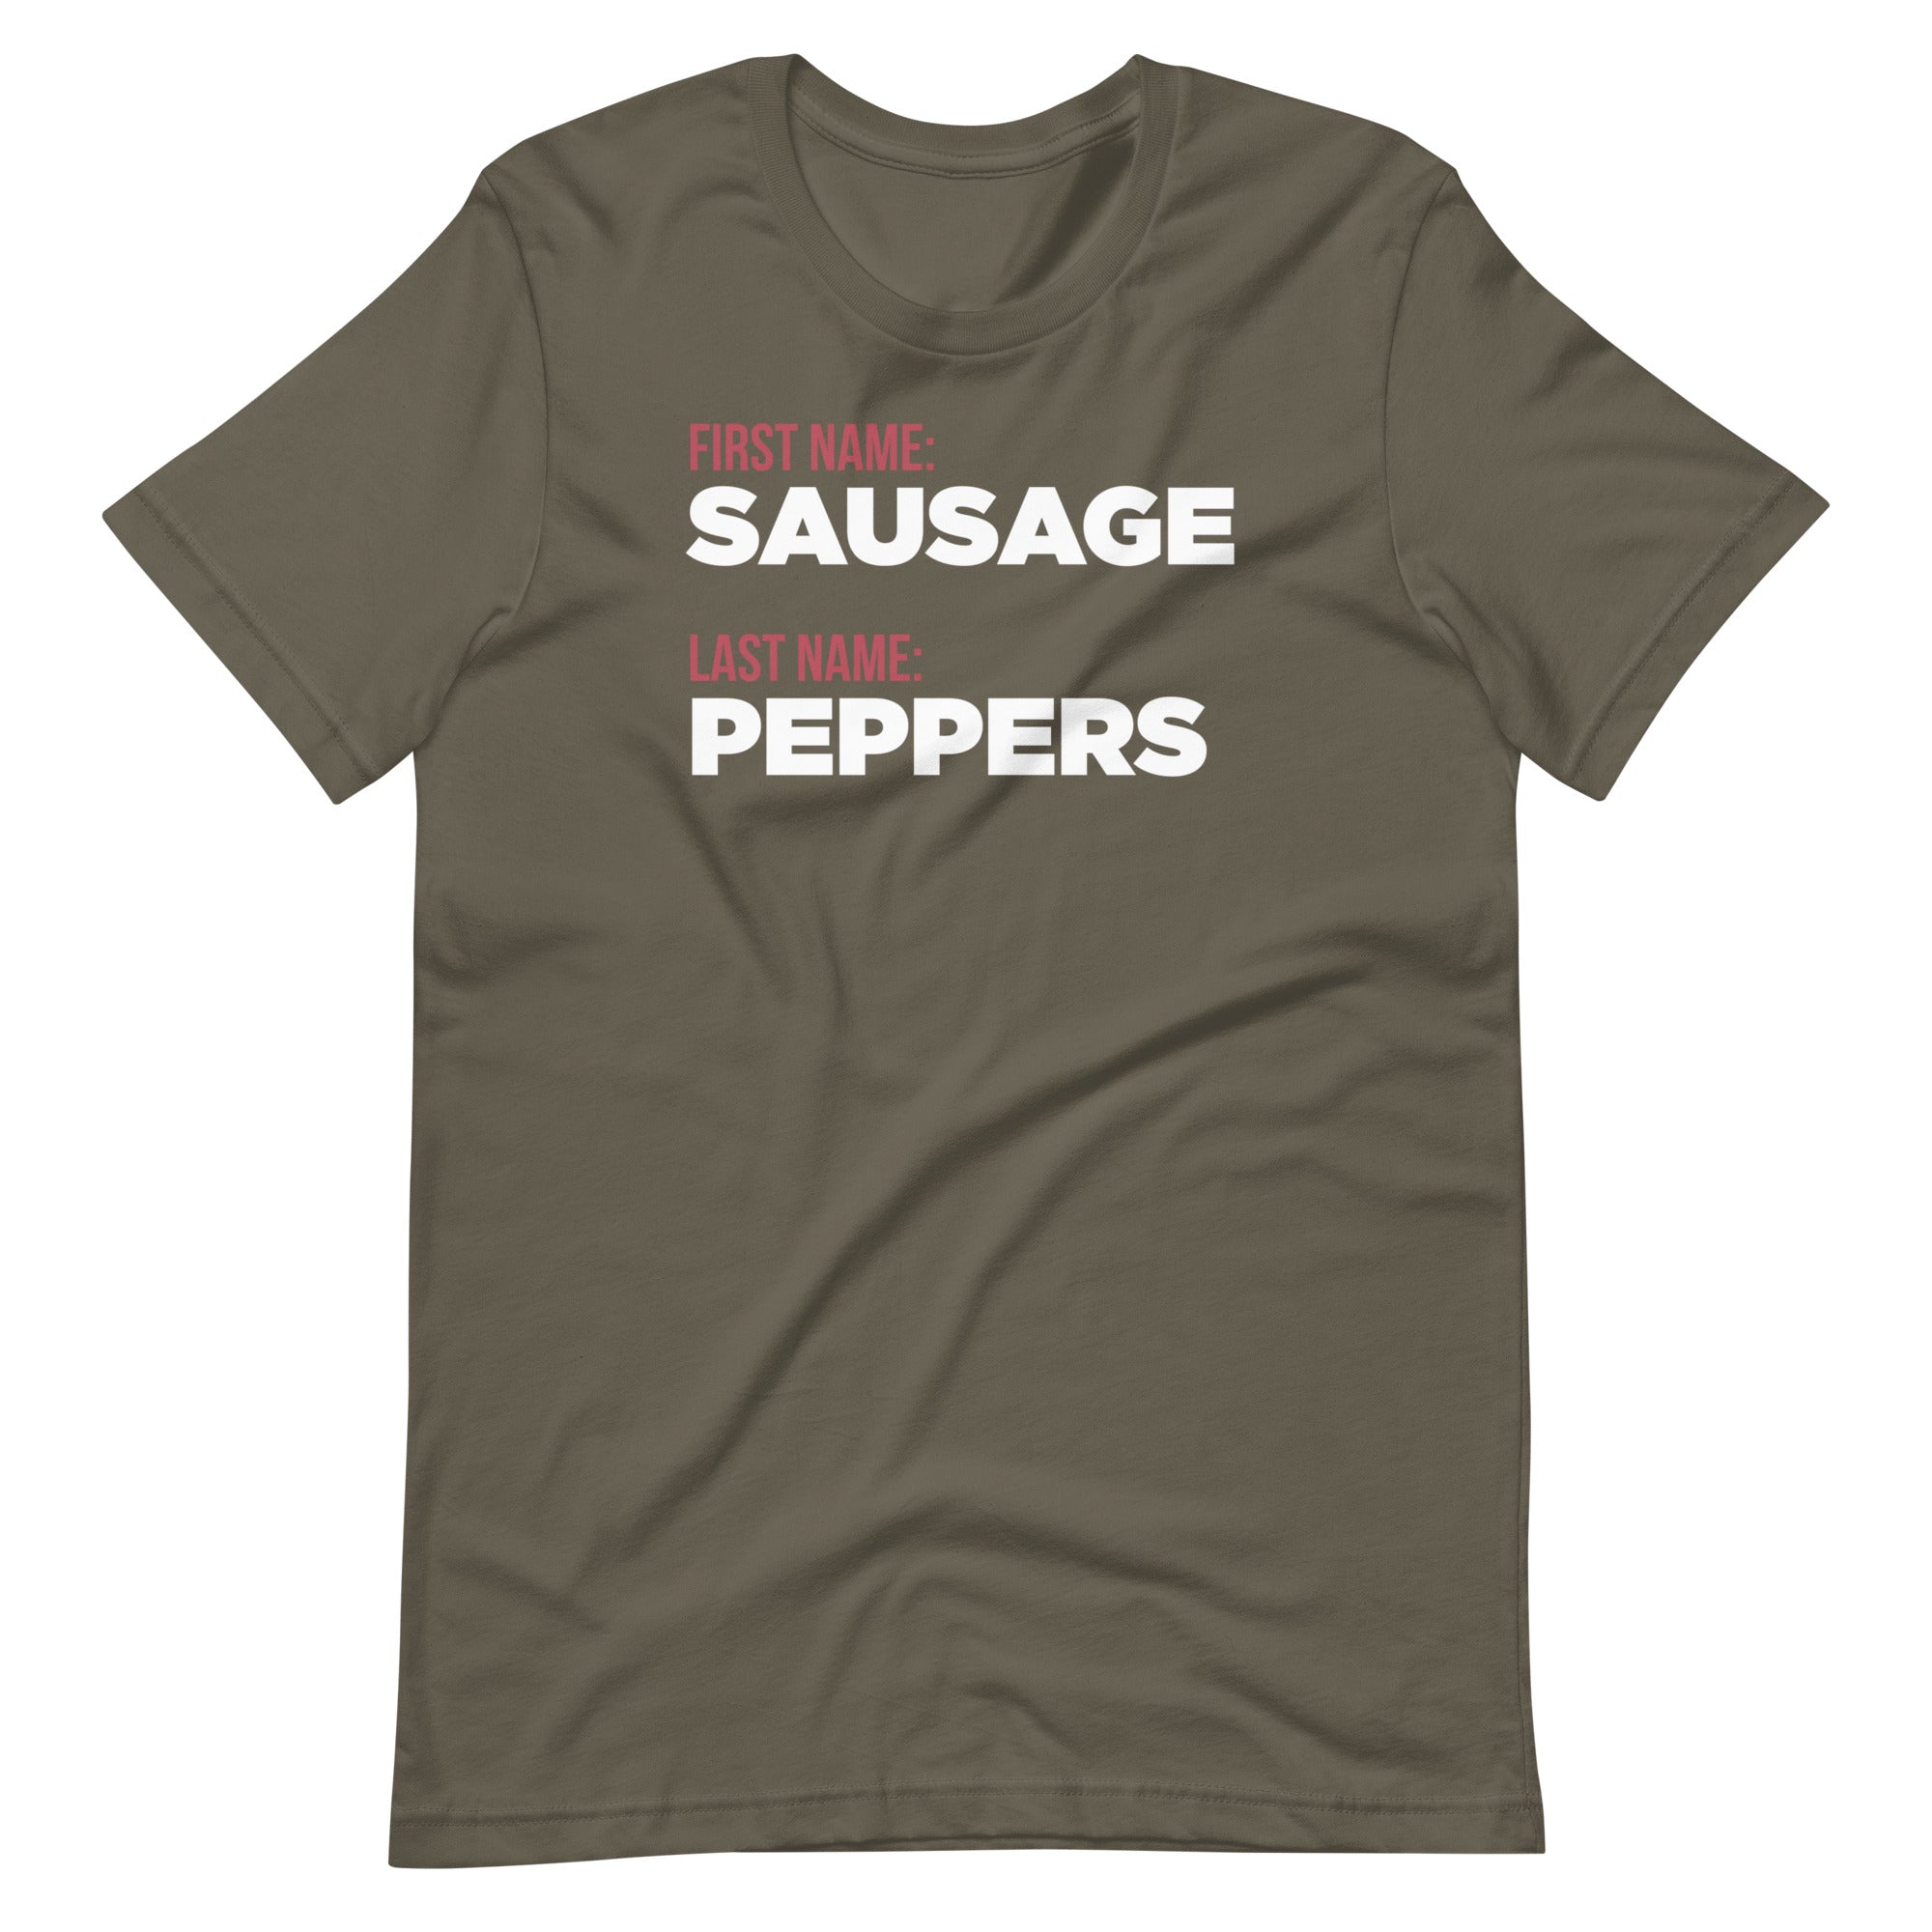 Mike Sorrentino Sausage And Peppers Shirt